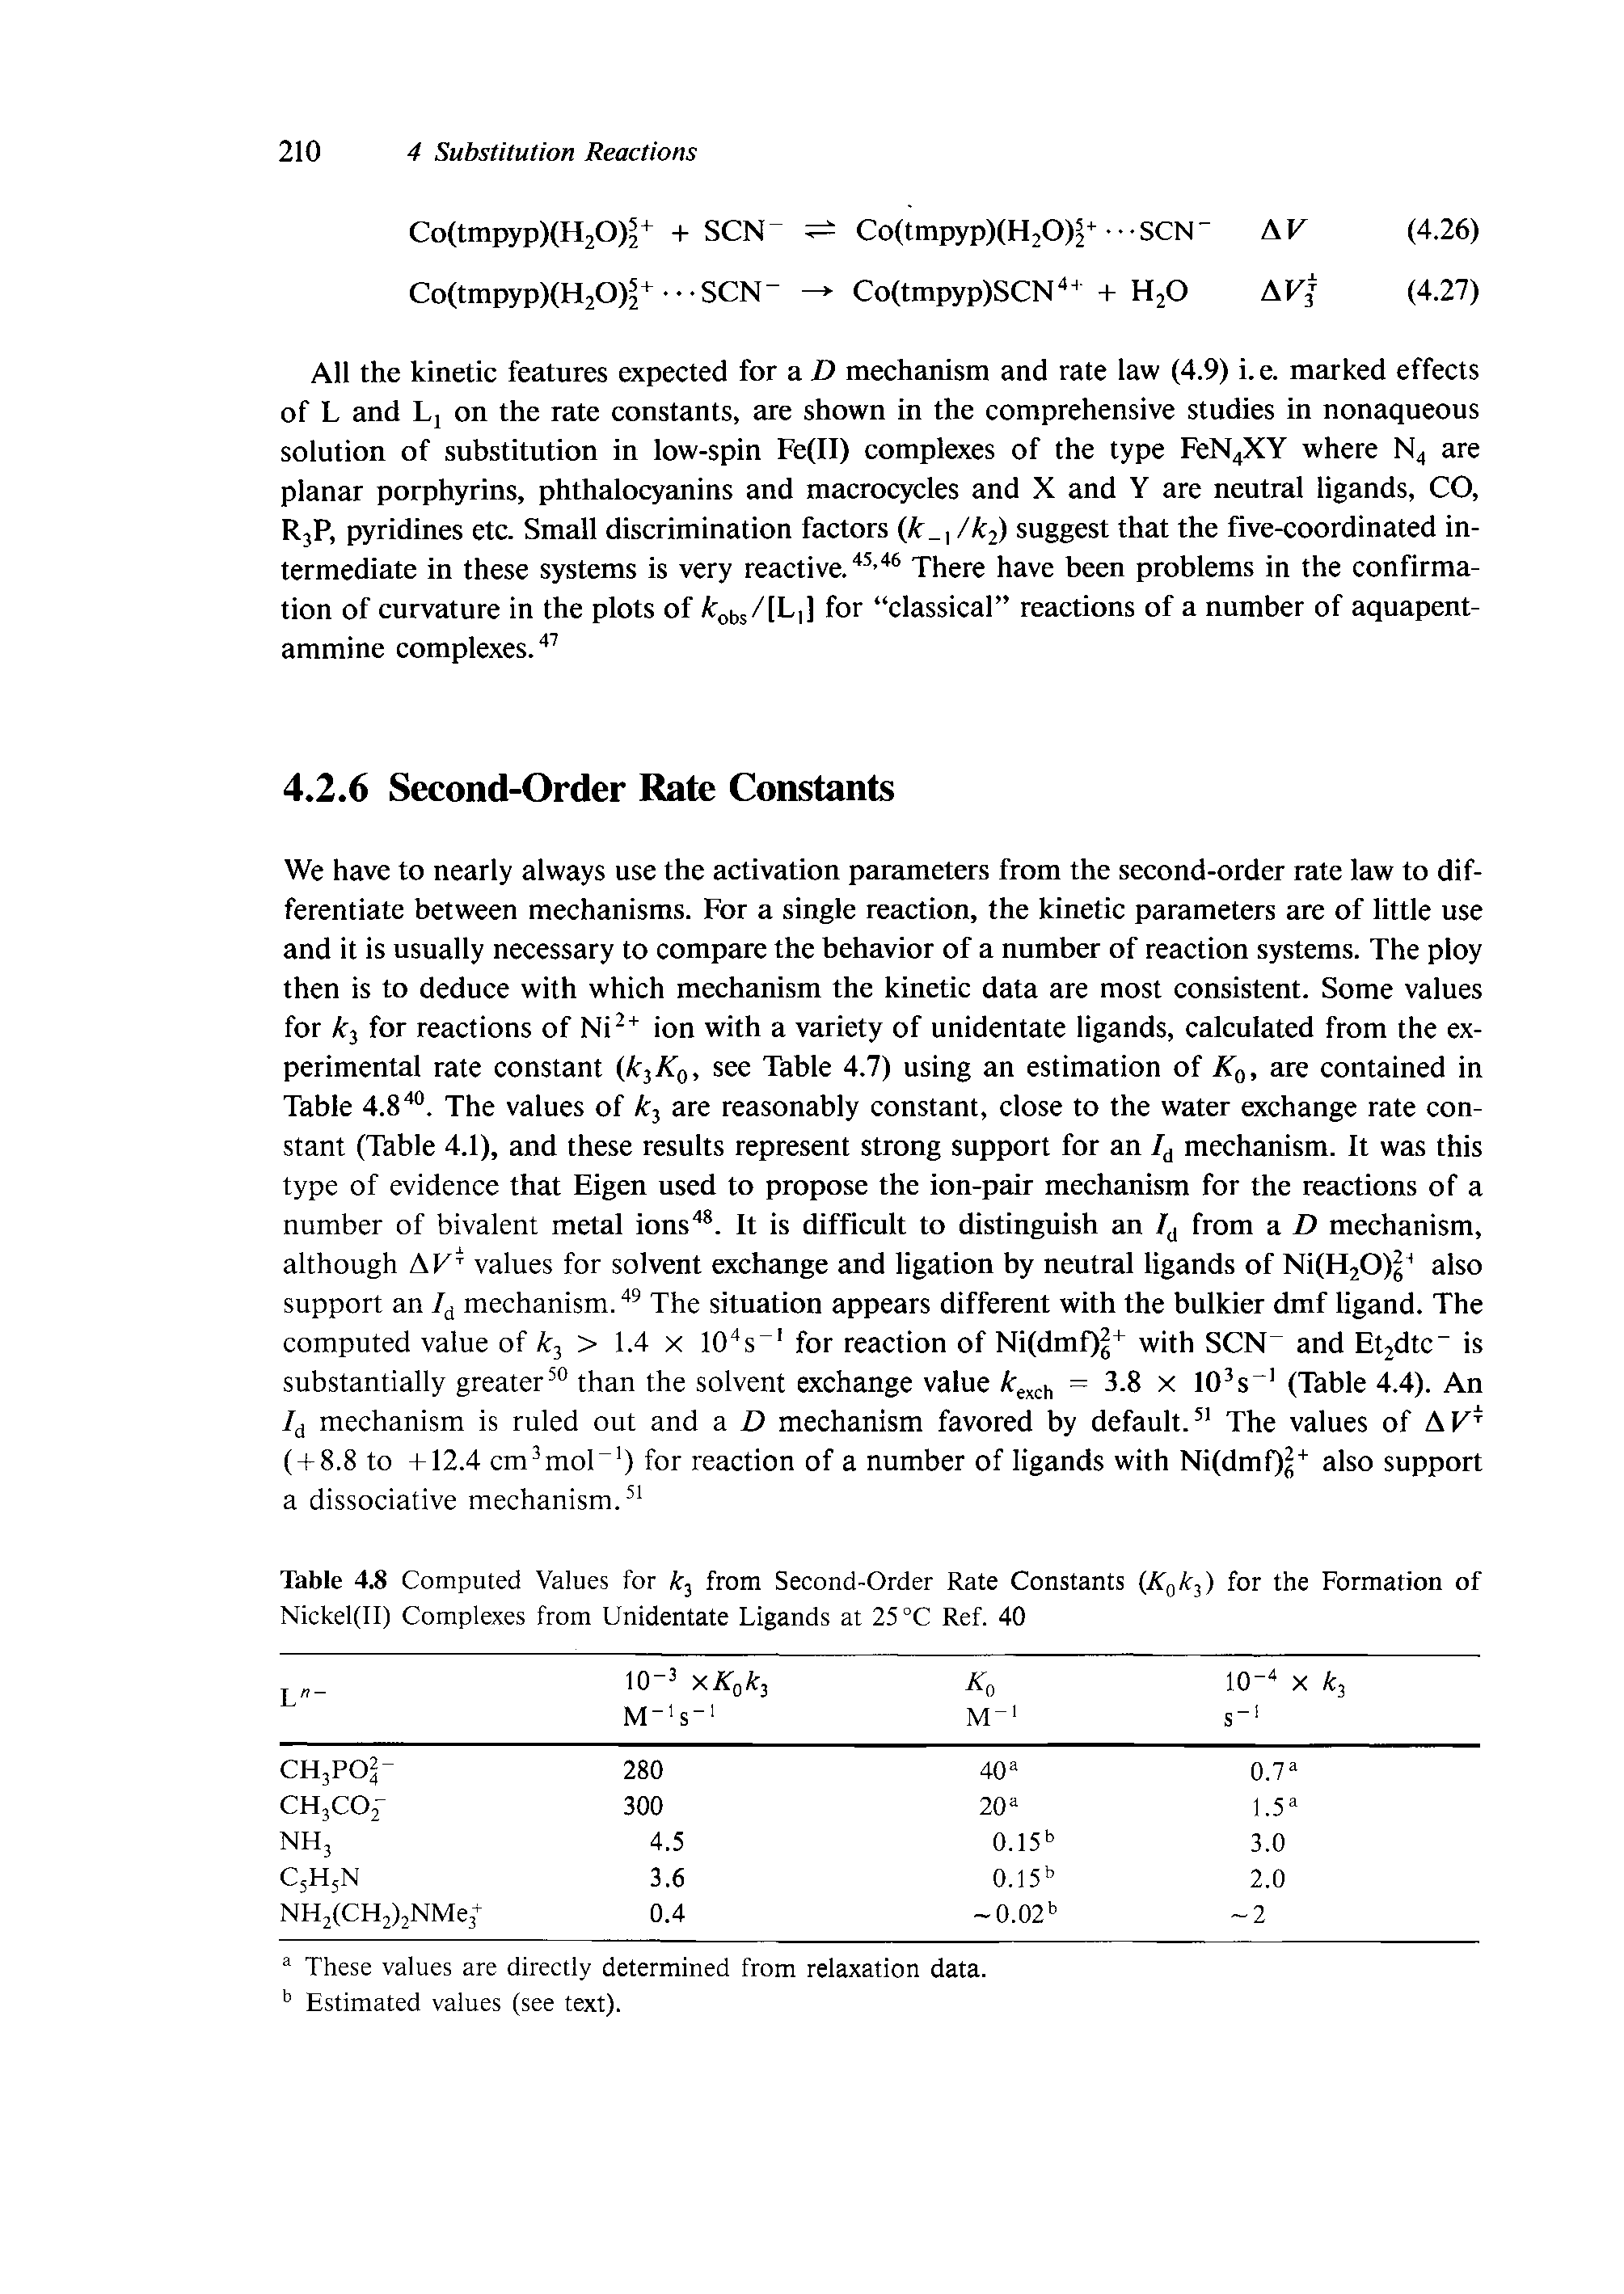 Table 4.8 Computed Values for kj from Second-Order Rate Constants (Kf k ) for the Formation of Nickel(II) Complexes from Unidentate Ligands at 25 °C Ref. 40...